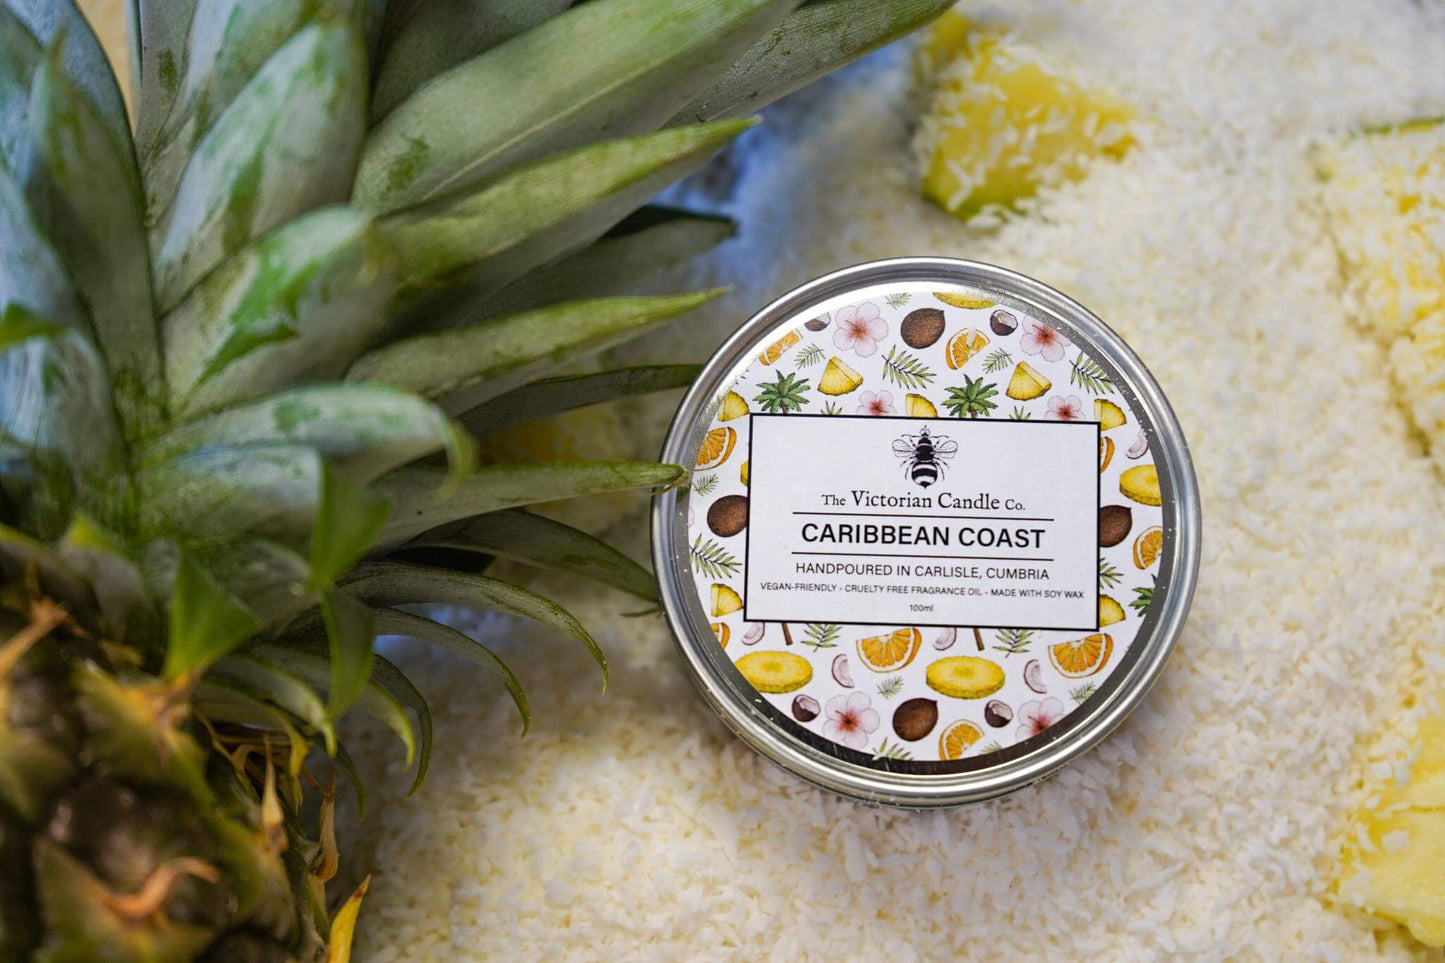 The Victorian Candle Co. "Caribbean Coast"